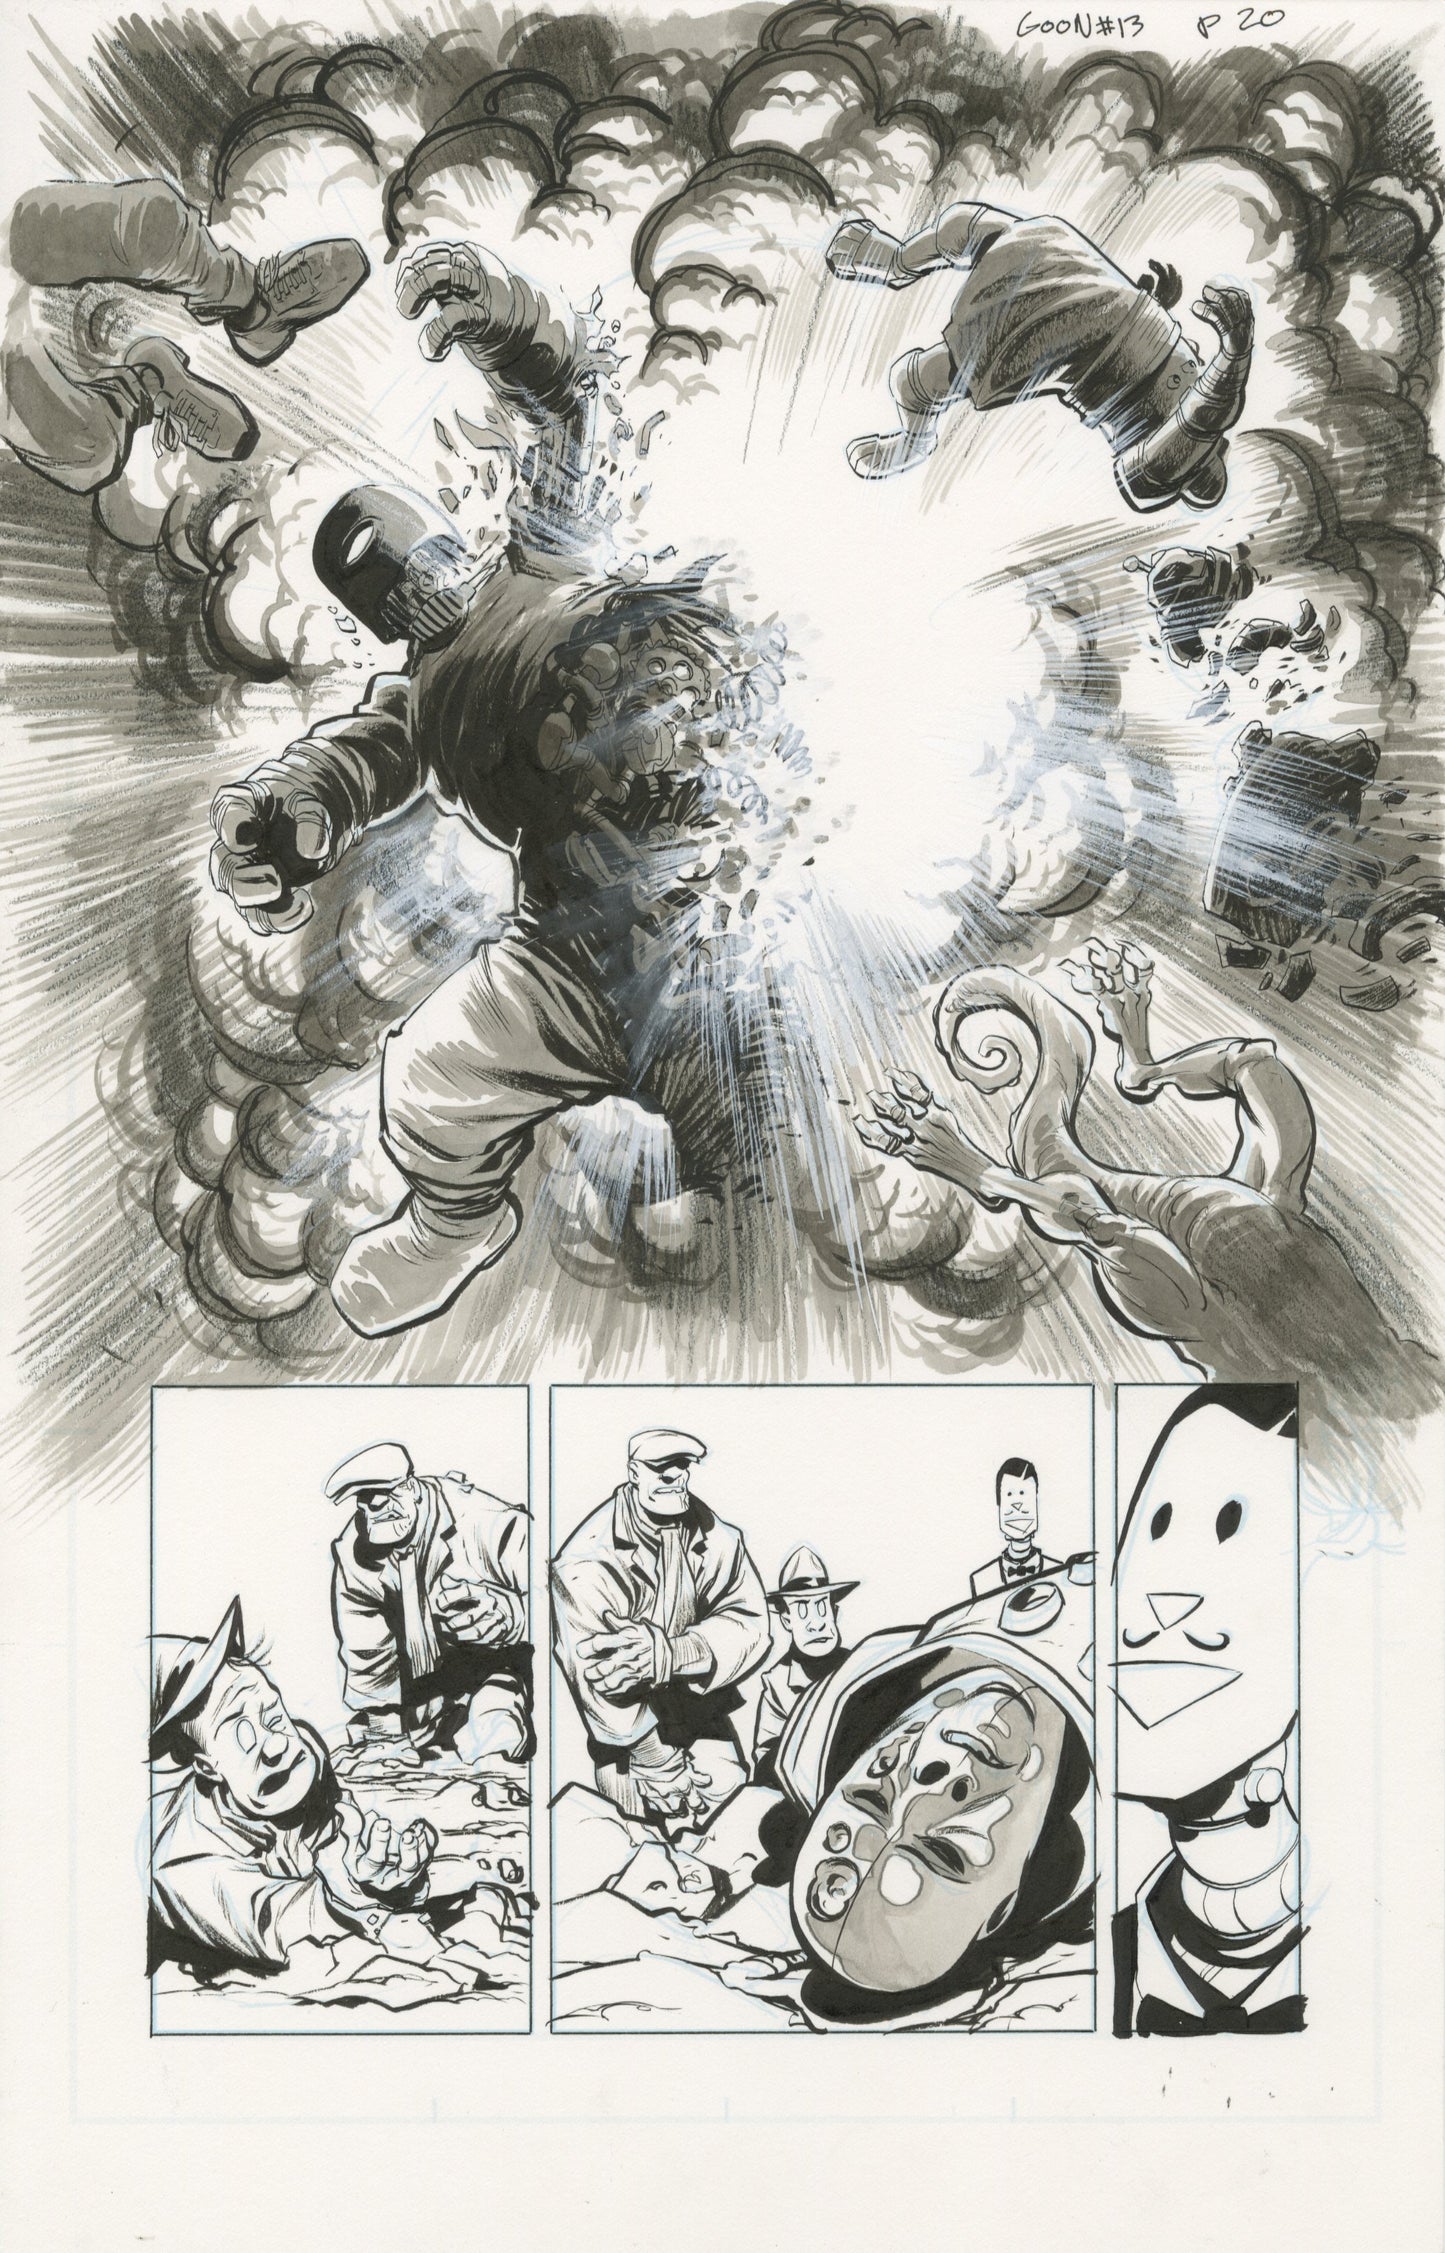 THE GOON #13, page #20